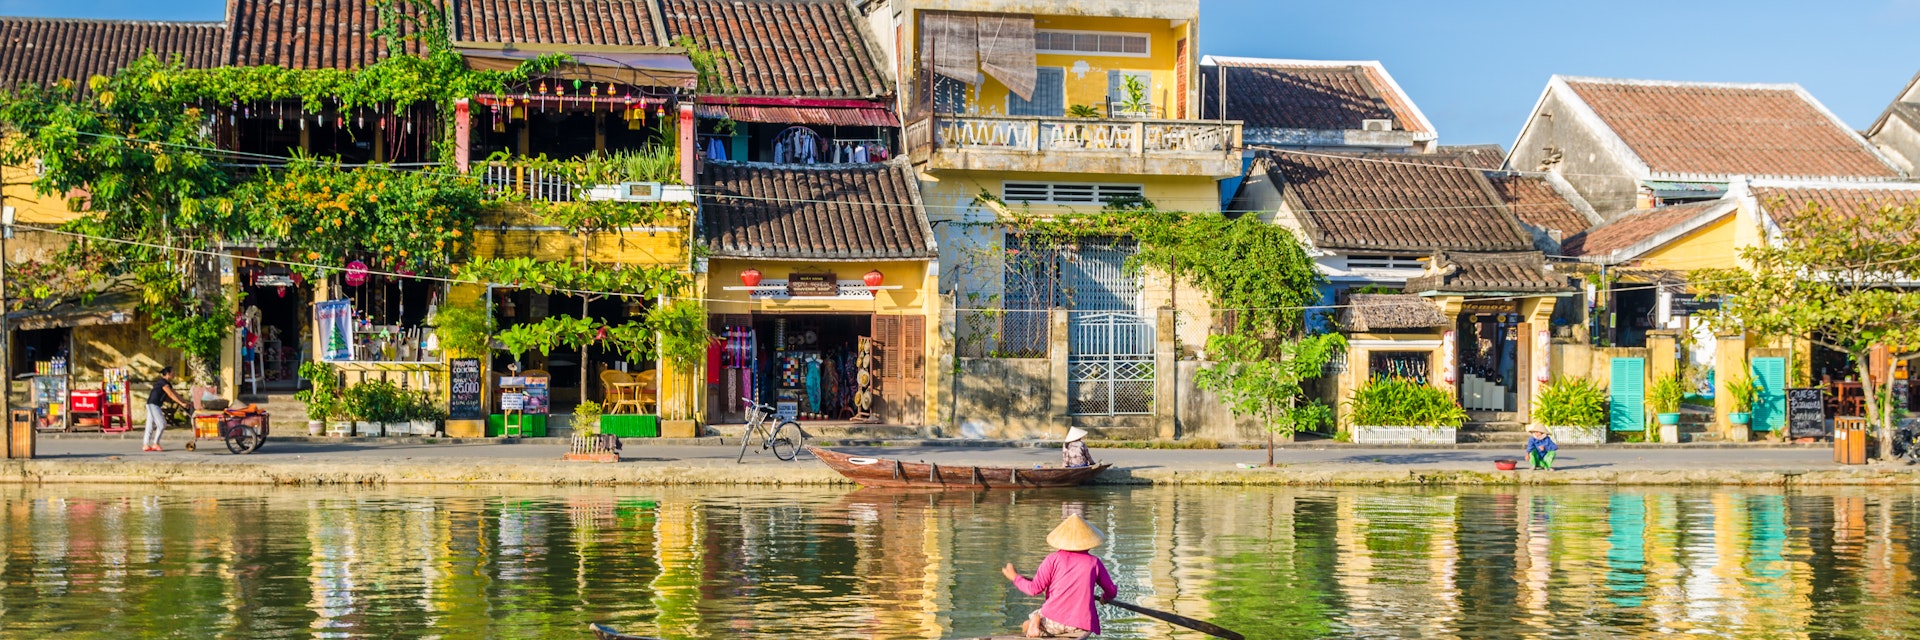 Hoi An during mid day
361749332
architecture, asia, boat, bright, culture, day, heritage, hoi, old, reflection, river, site, texture, traditional, transportation, travel, vietnam, vietnamese, vintage, water, world, yellow